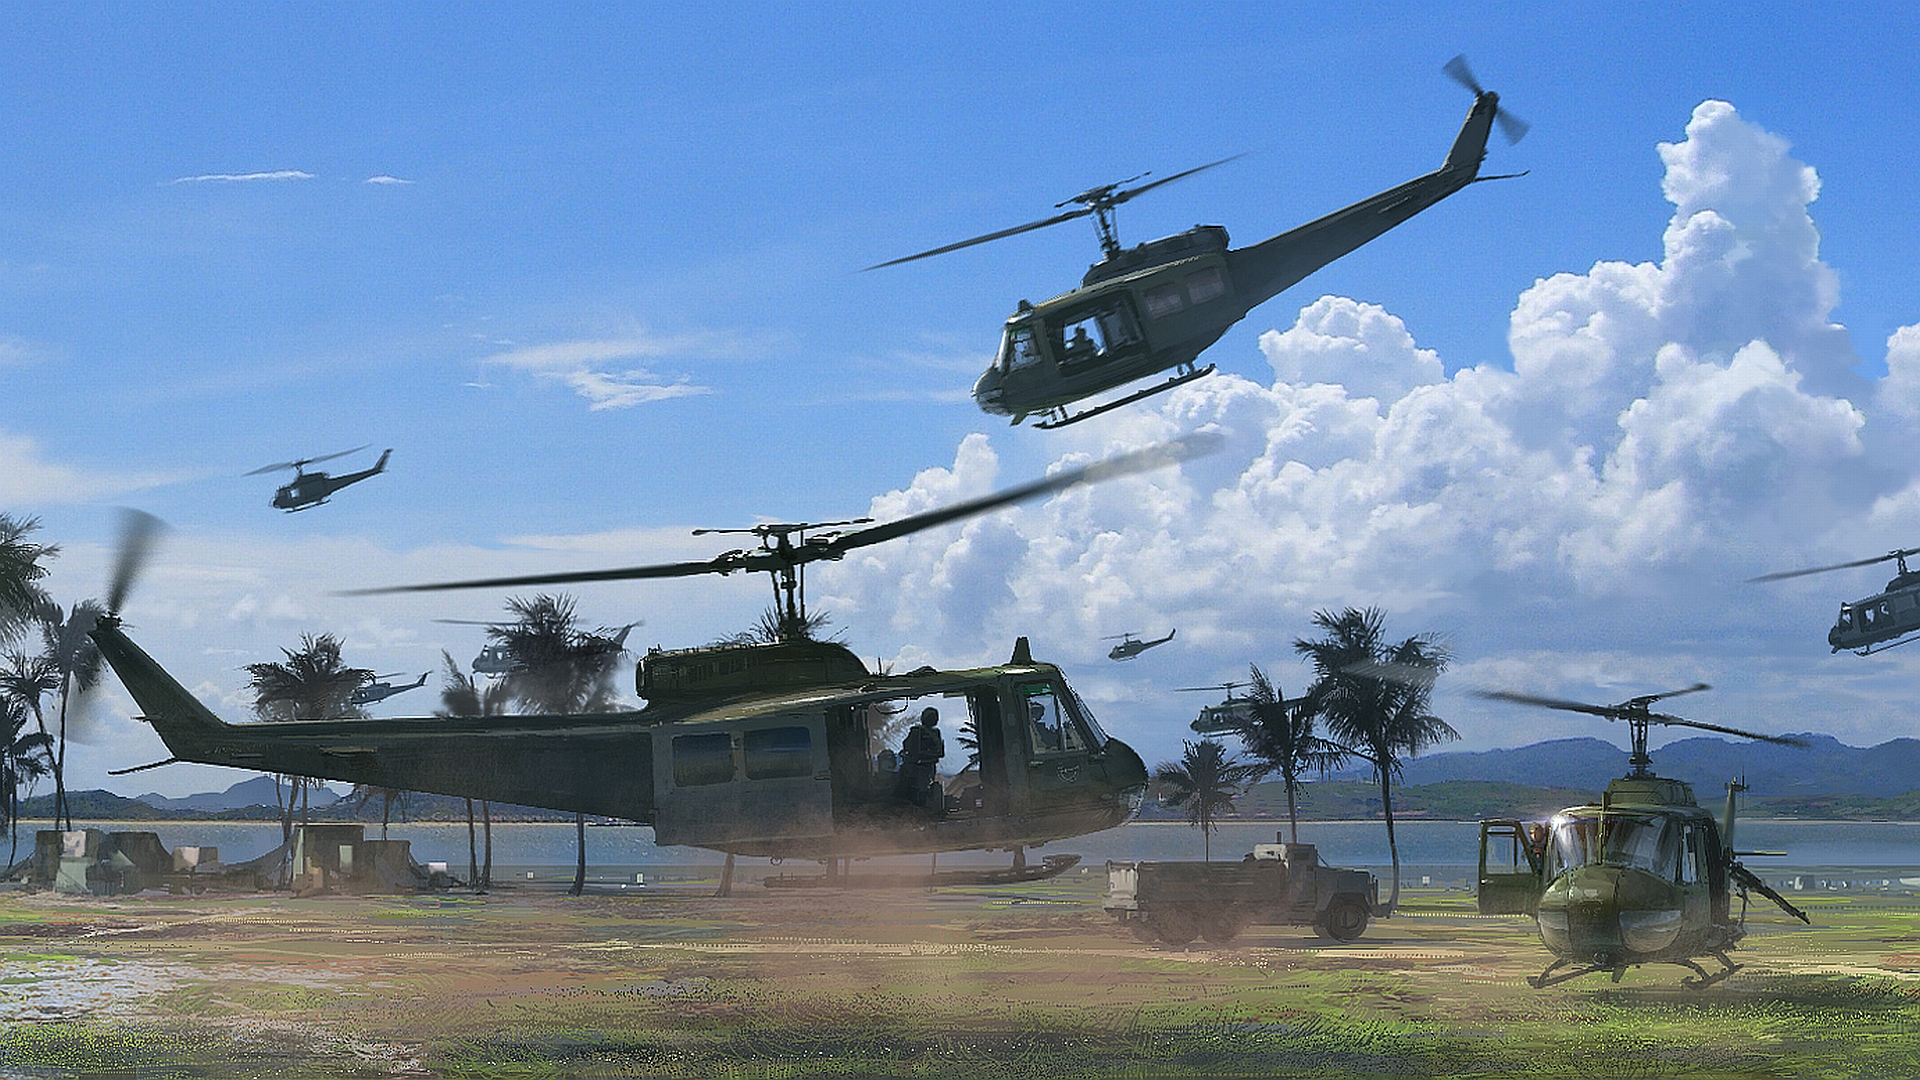 Military Helicopter Wallpaper 1920x1080 Military Helicopter